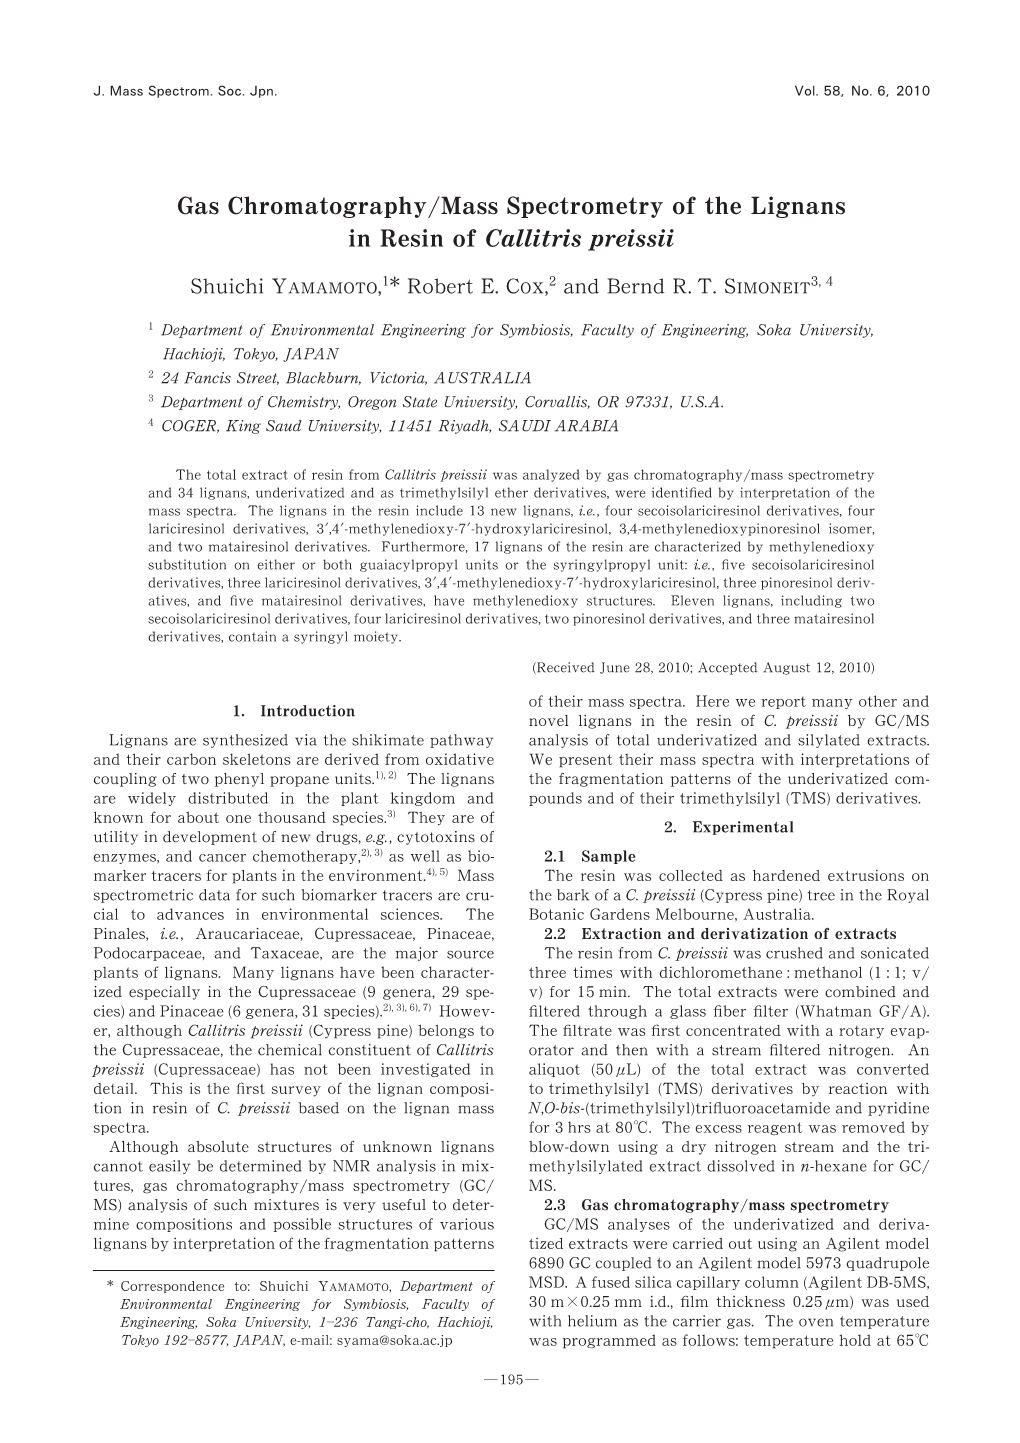 Gas Chromatography/Mass Spectrometry of the Lignans in Resin of Callitris Preissii